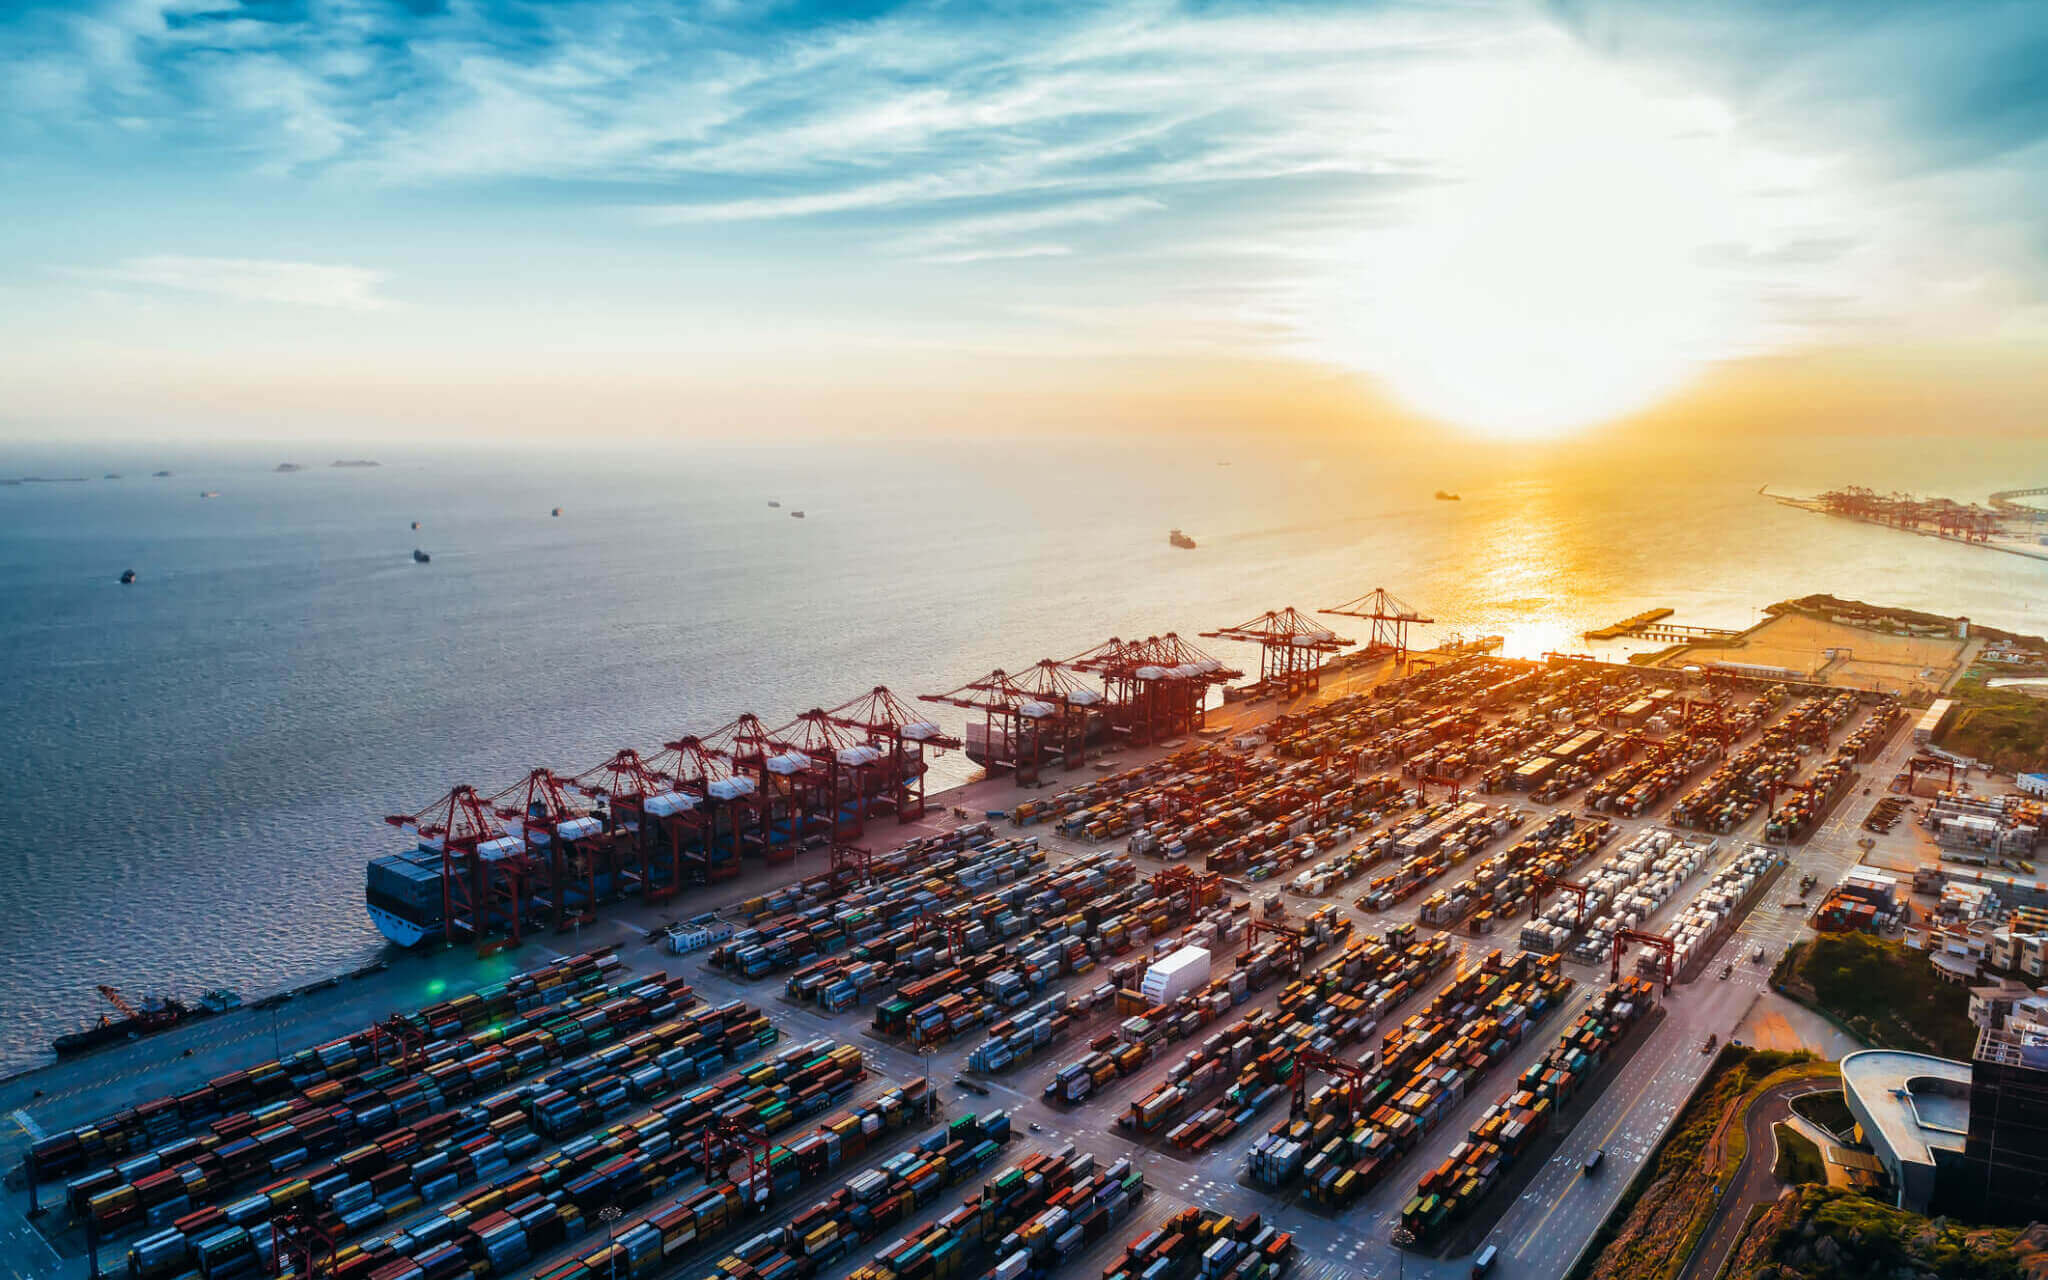 An aerial view of the Port of Shanghai. Visible are shipping containers lined up at the port with the East China Sea on the left and a golden sunset on the horizon to the right. 